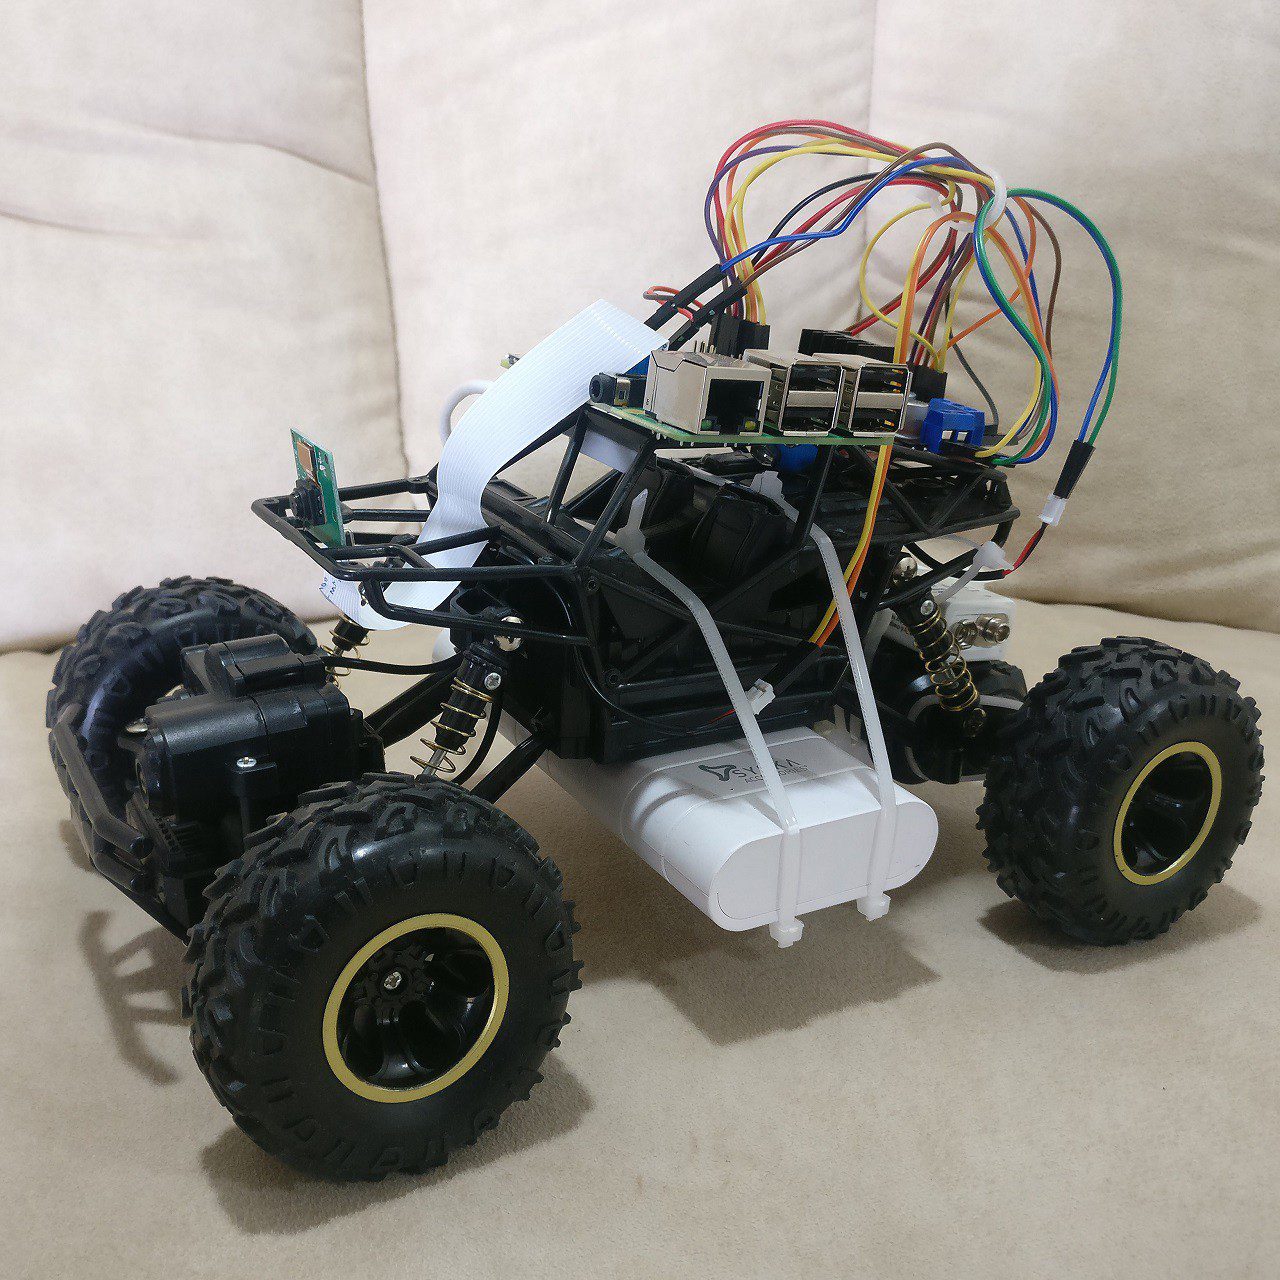 Raspberry pi car projects